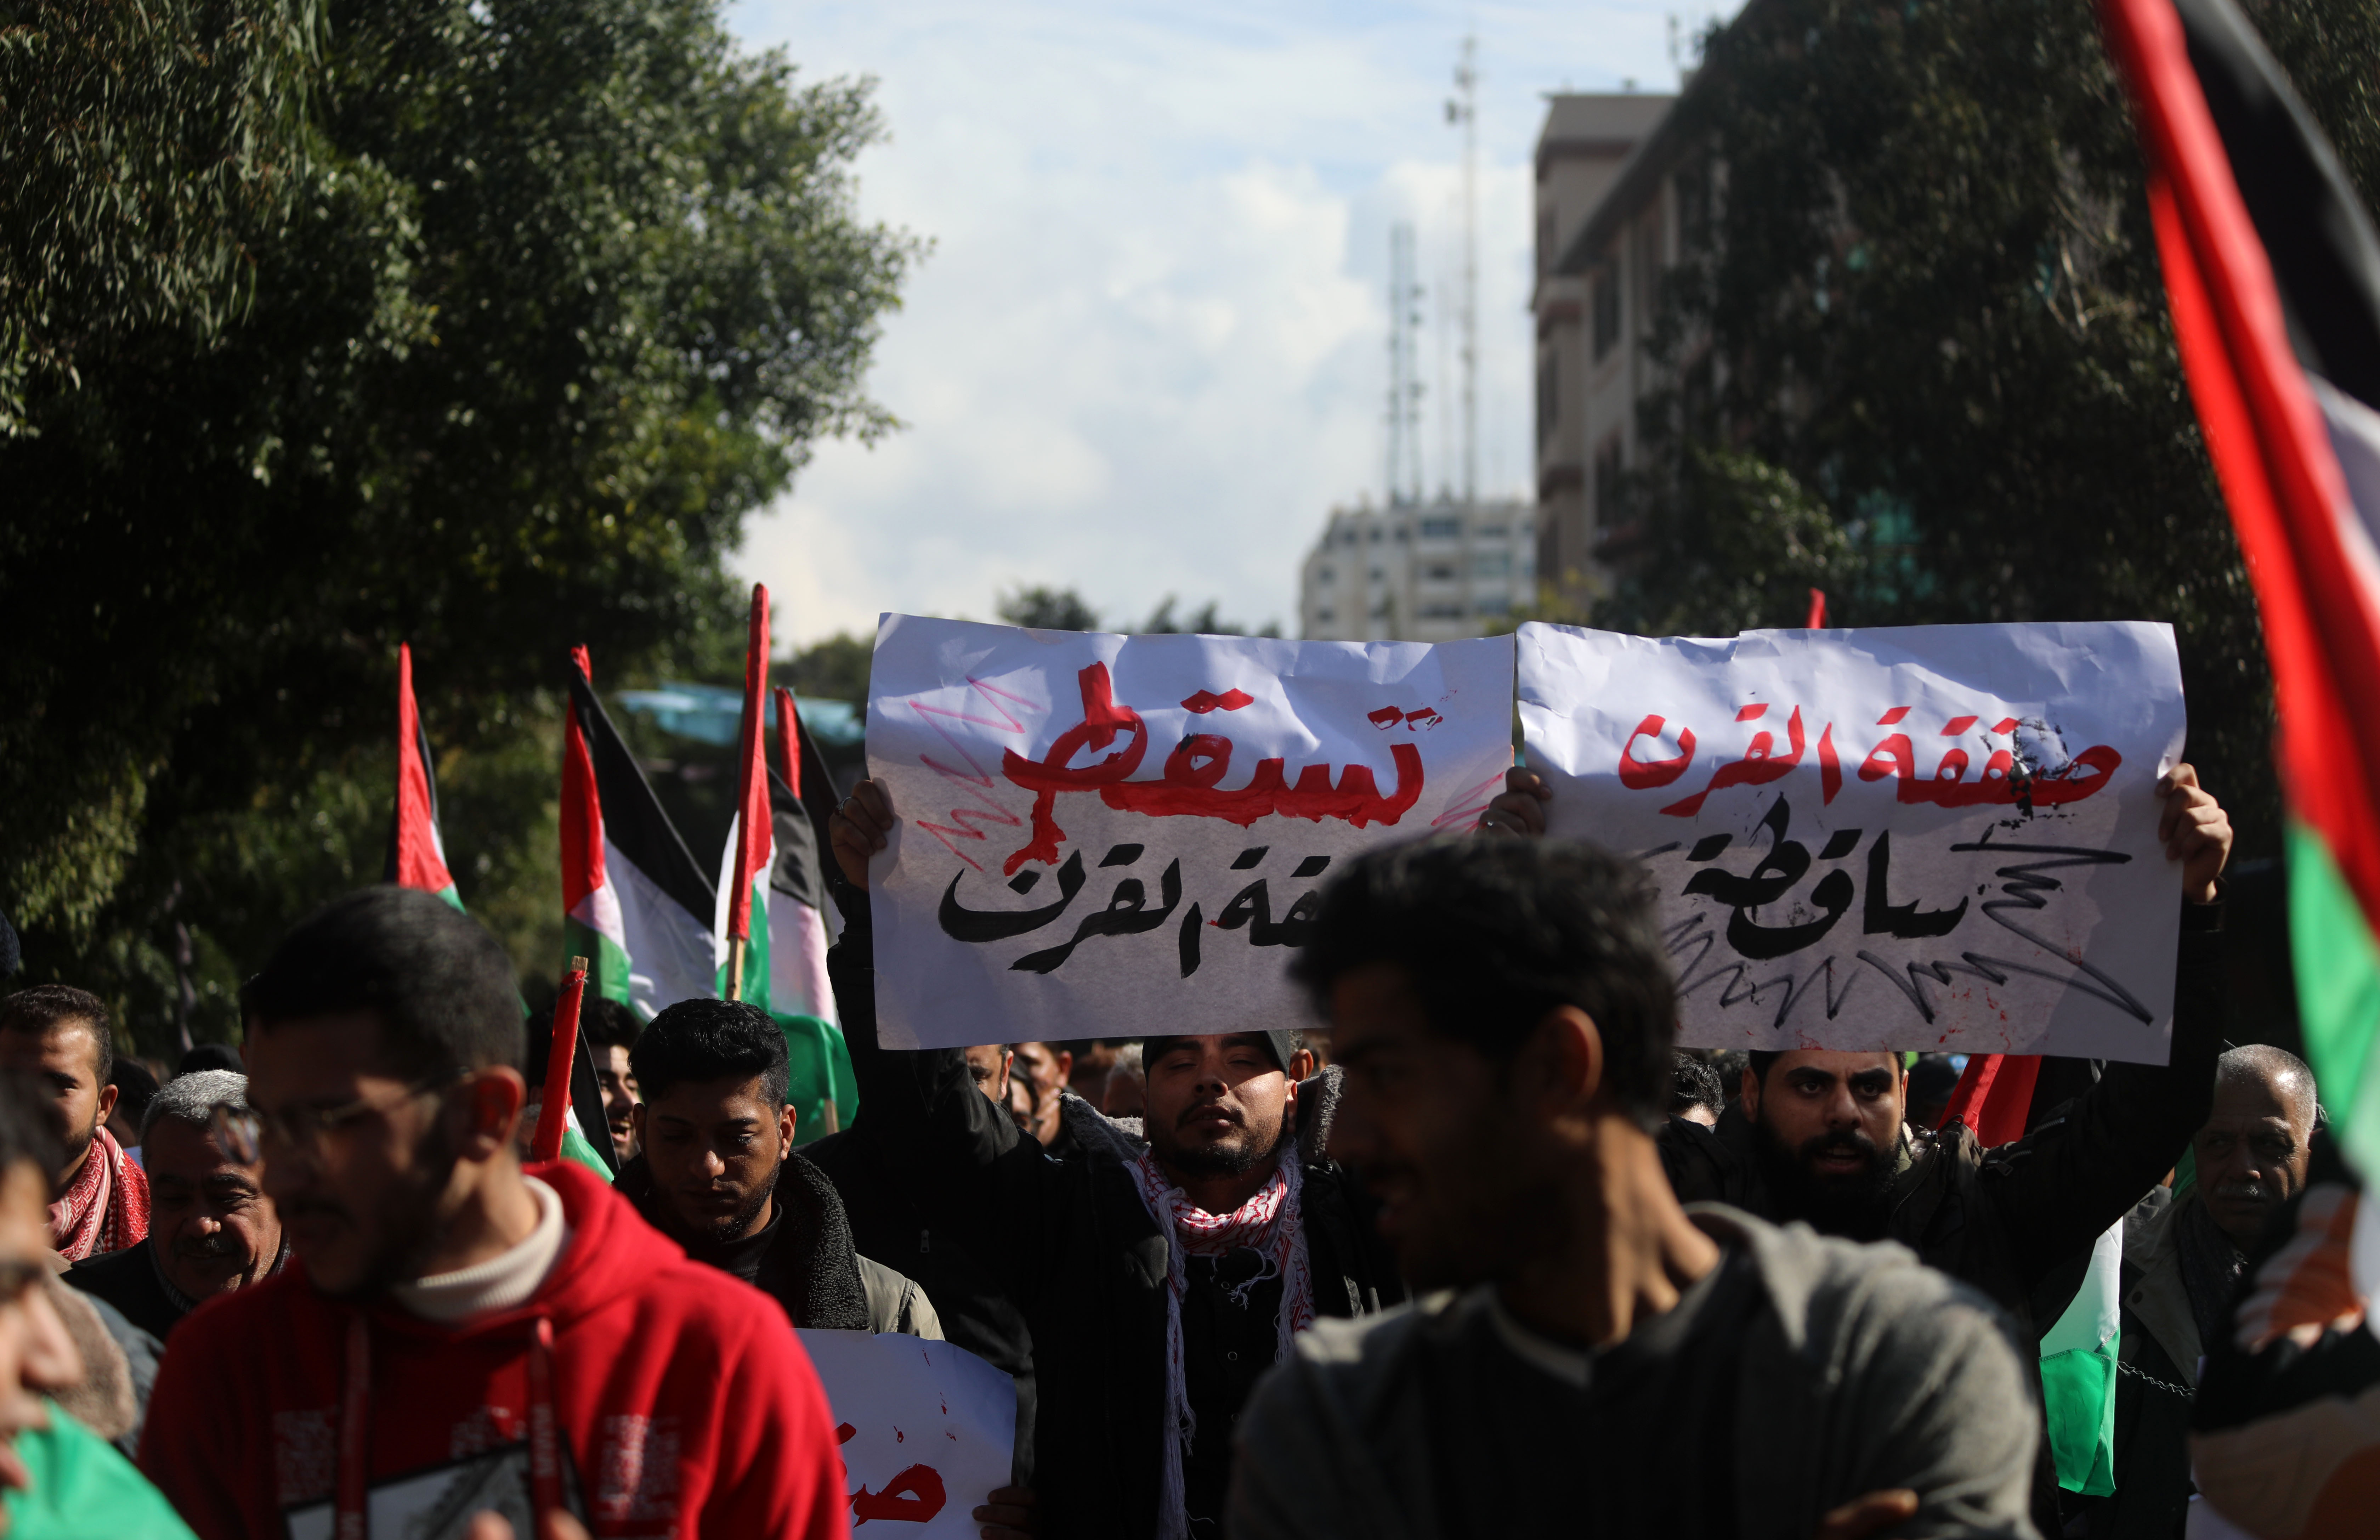 Protestors call for the deal of the century to be broken (MEE/Muhammad al Hajjar)